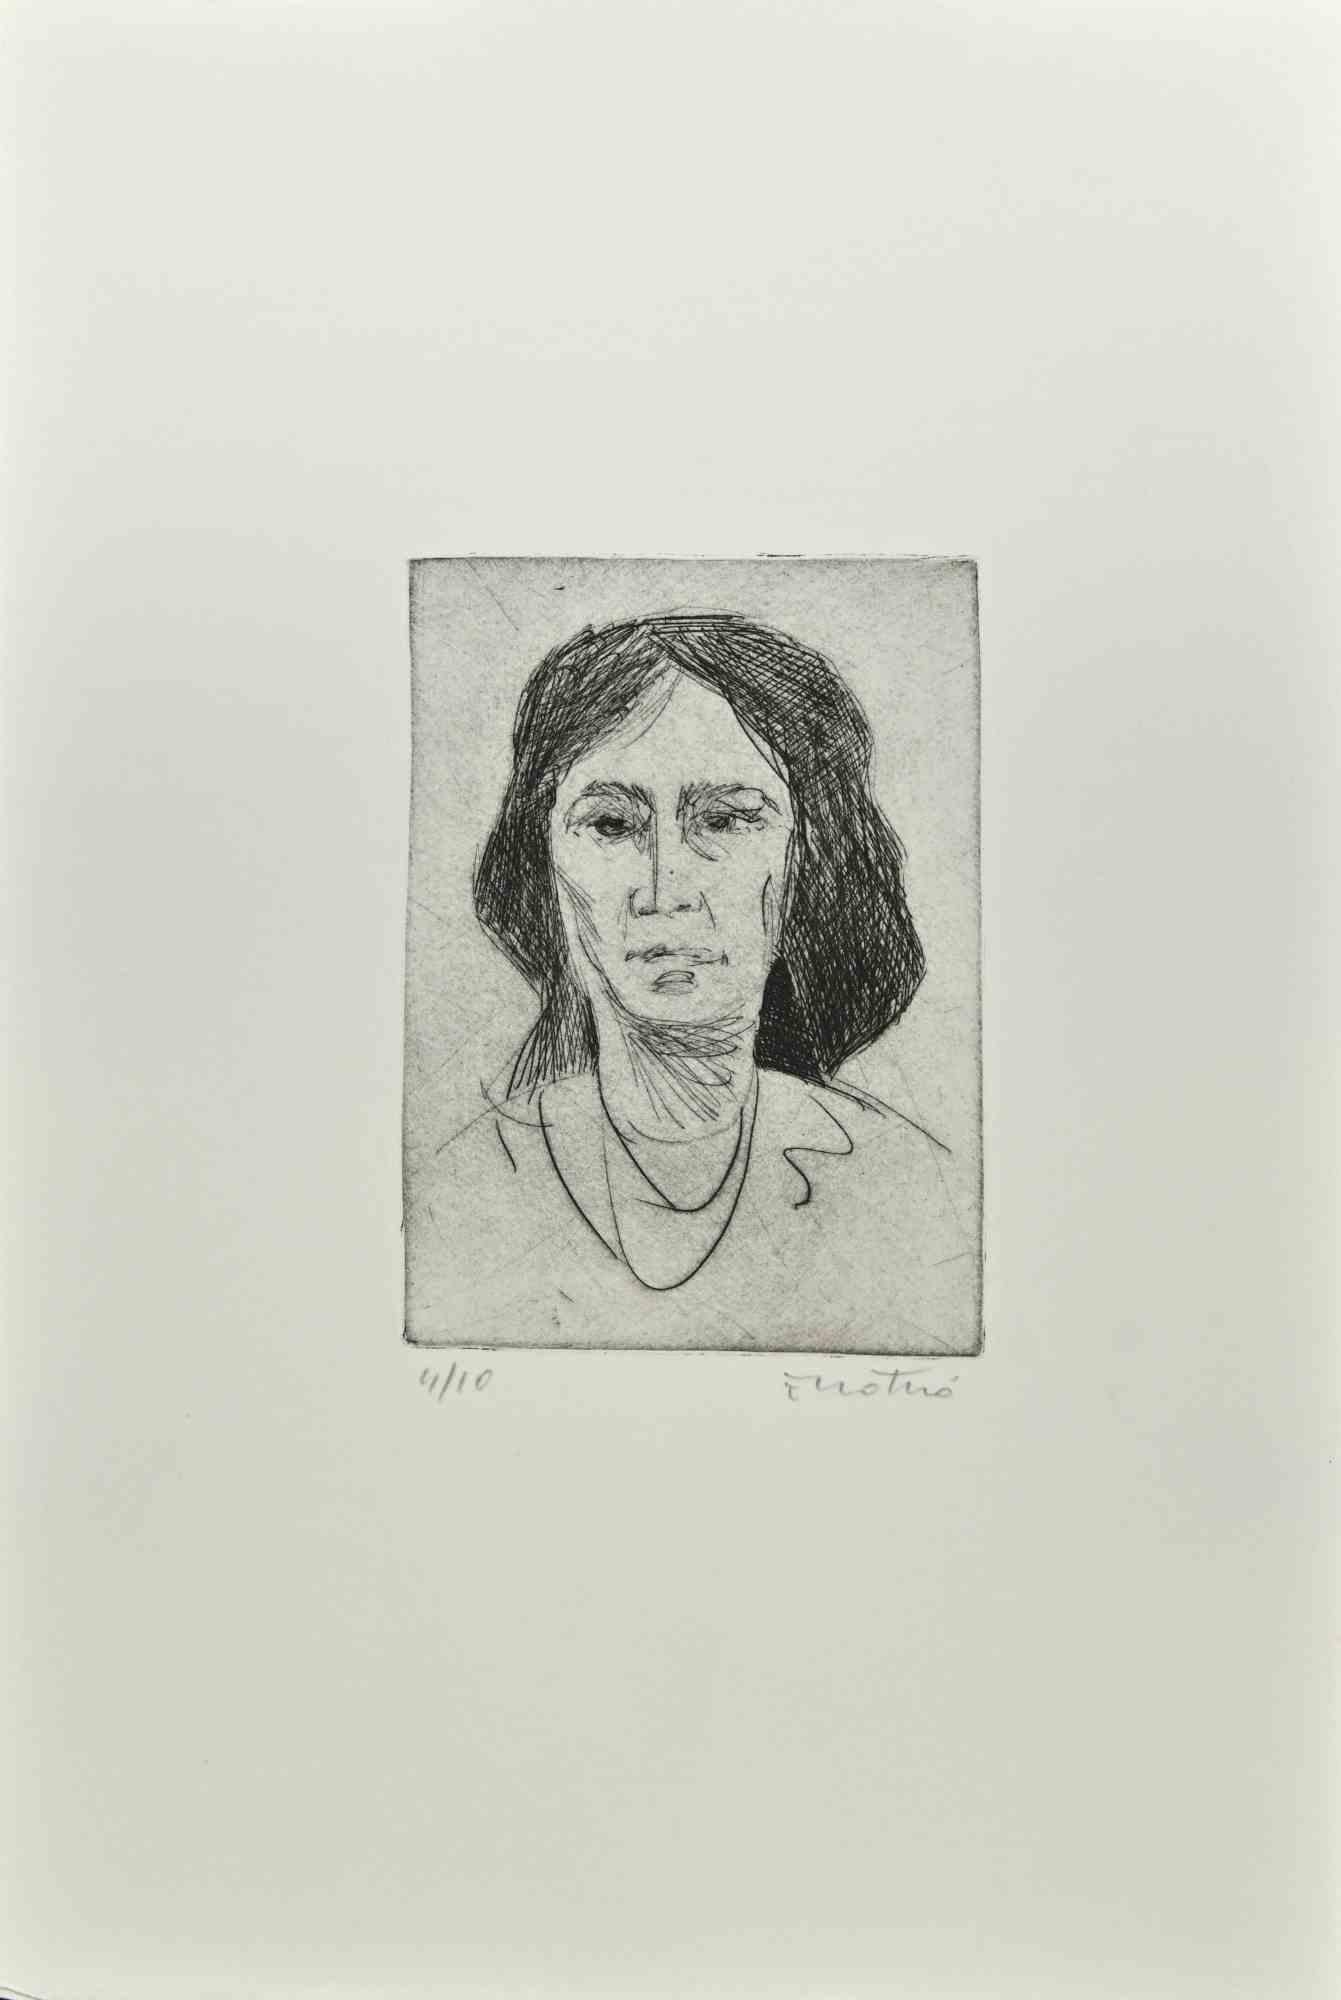 Woman is an Etching realized by Enotrio Pugliese in 1963.

Limited edition of 10 copies numbered and signed by the artist.

Good condition on a white cardboard

Enotrio Pugliese (May 11, 1920 - August 1989) was an Italian painter. Born in Buenos